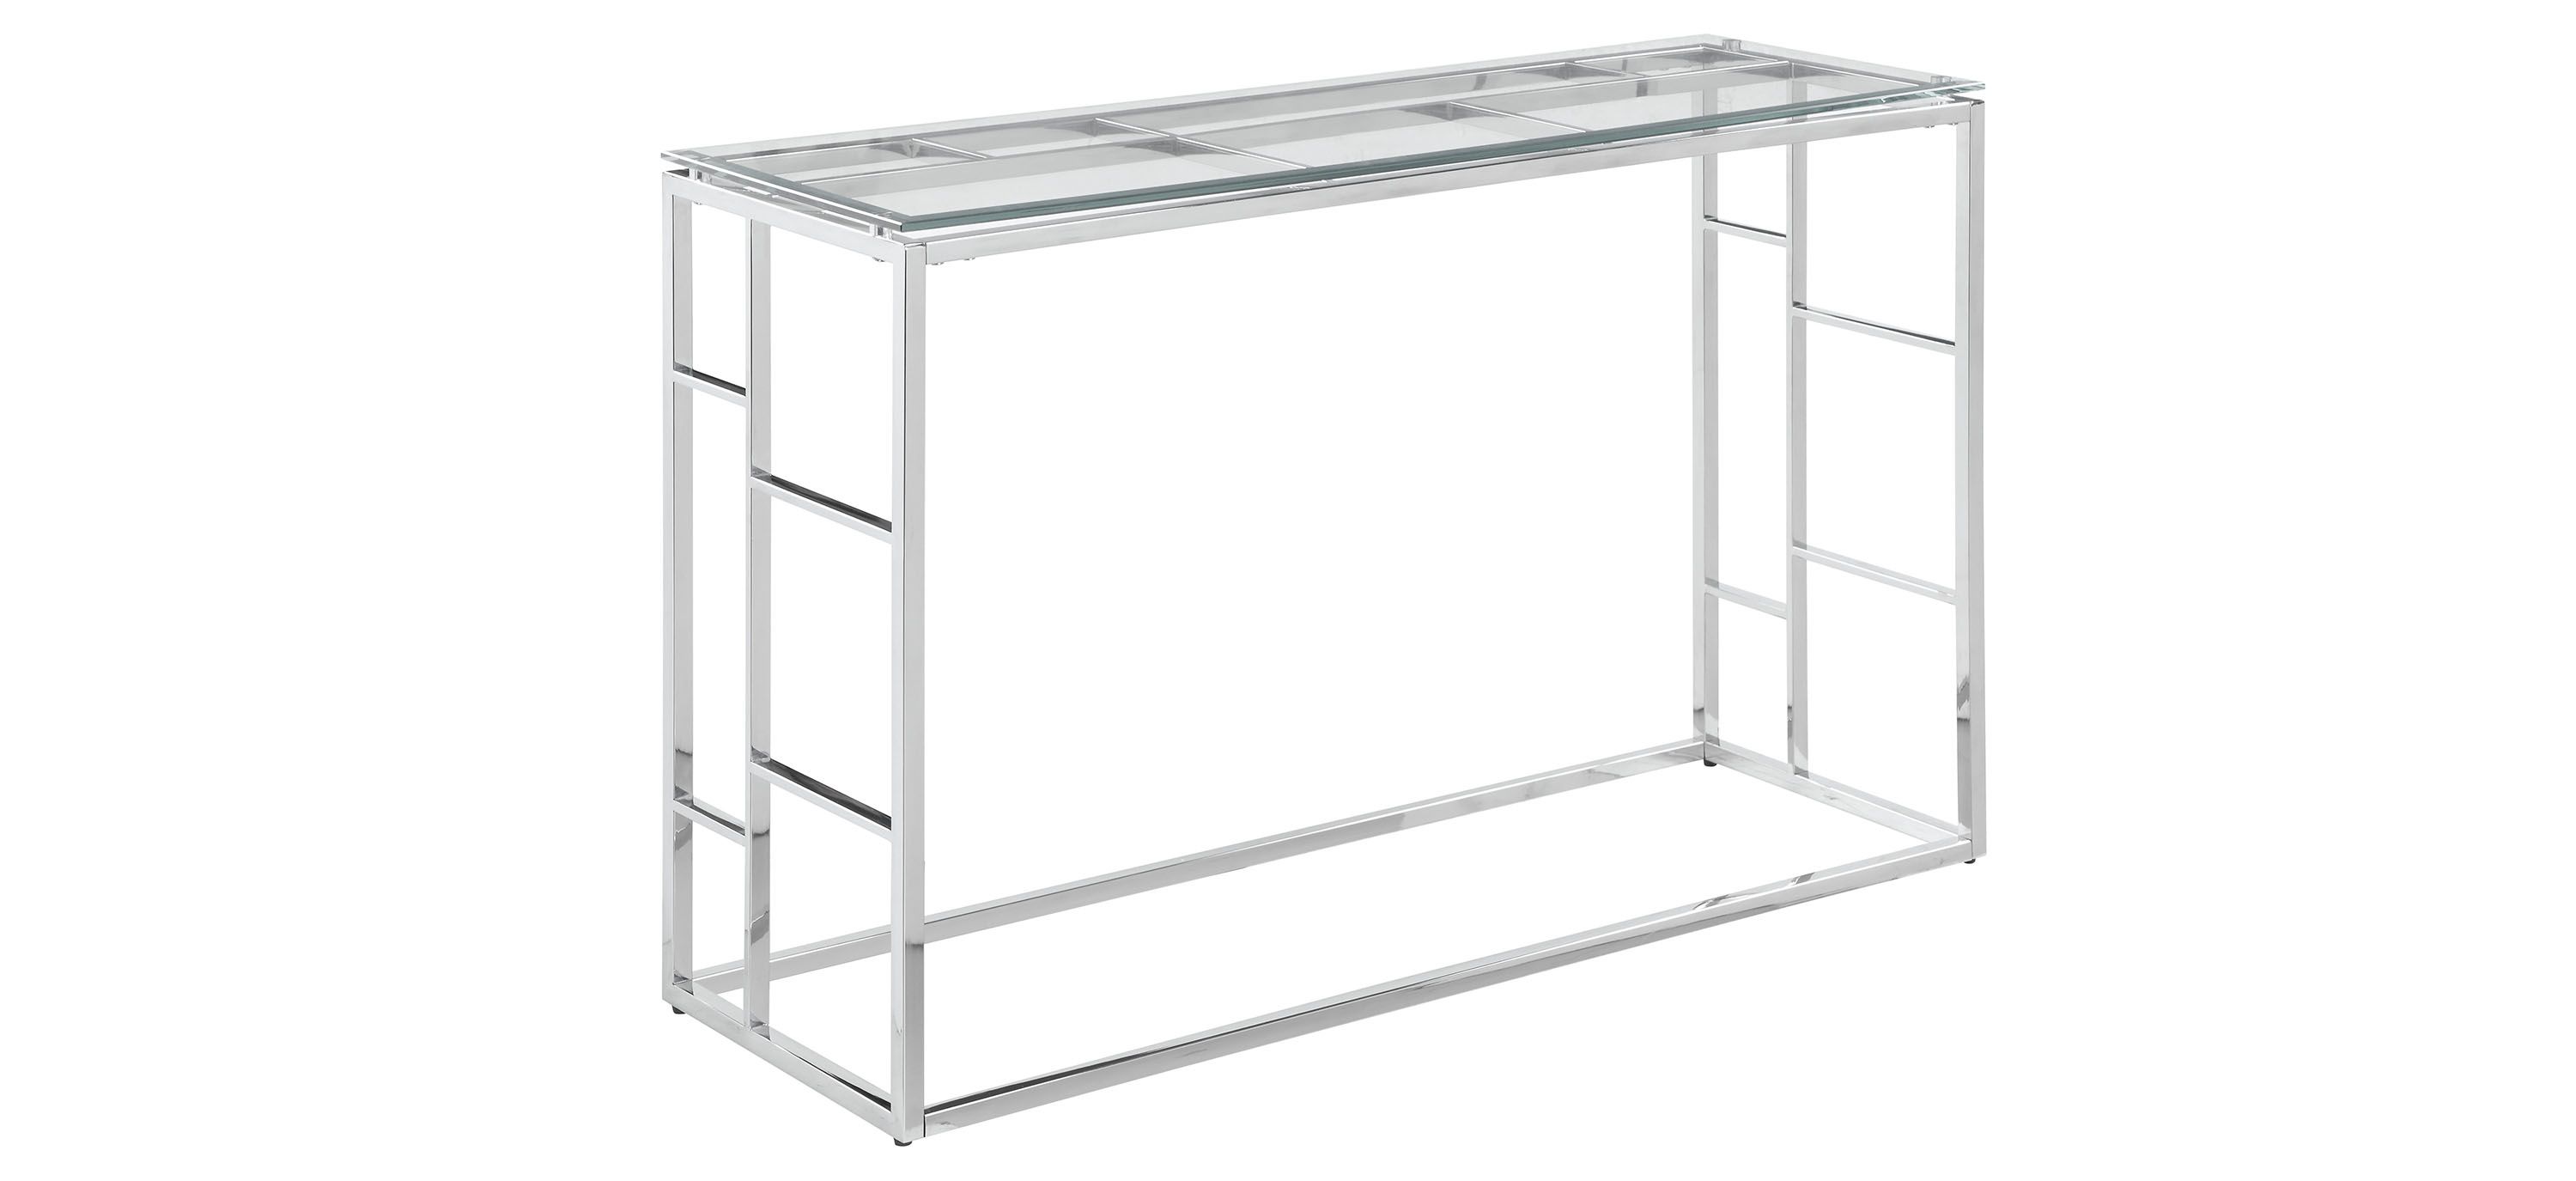 Addie Glass Cocktail Table